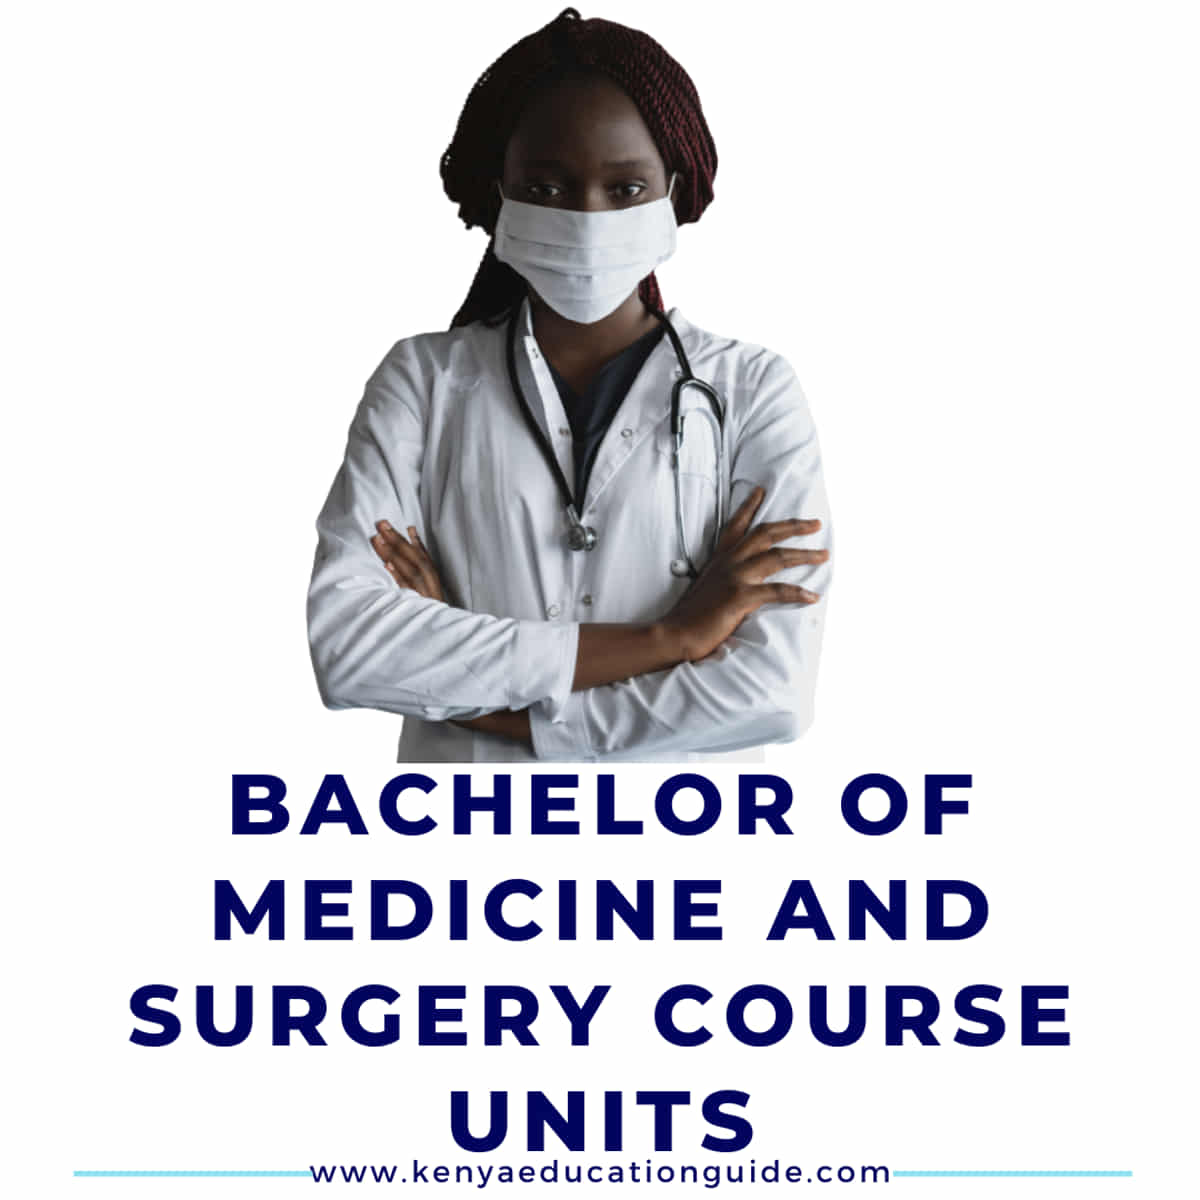 Bachelor of medicine and surgery course units